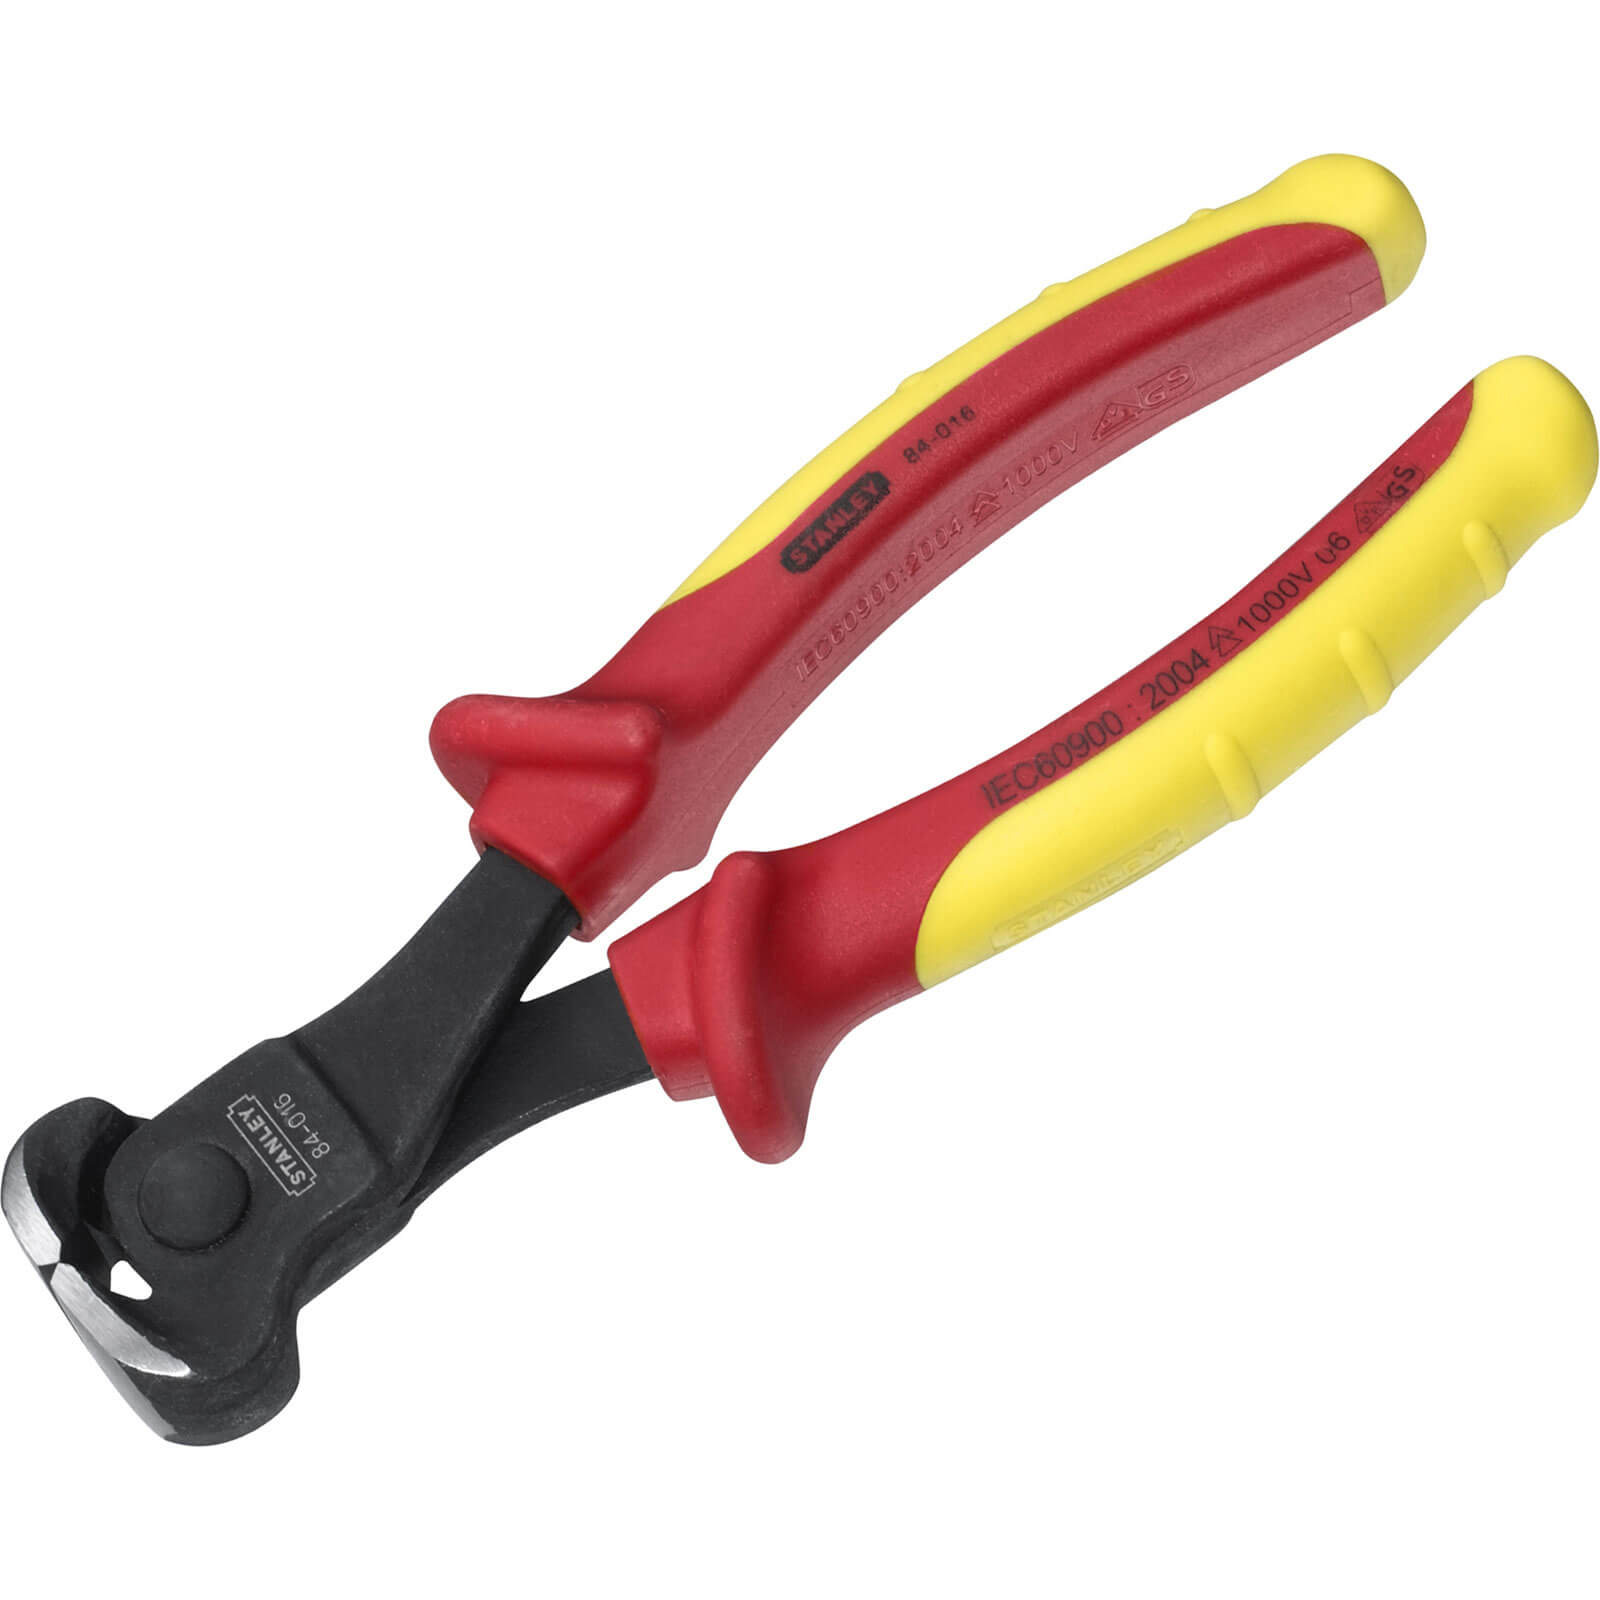 Image of Stanley Insulated End Cutting Pliers 160mm